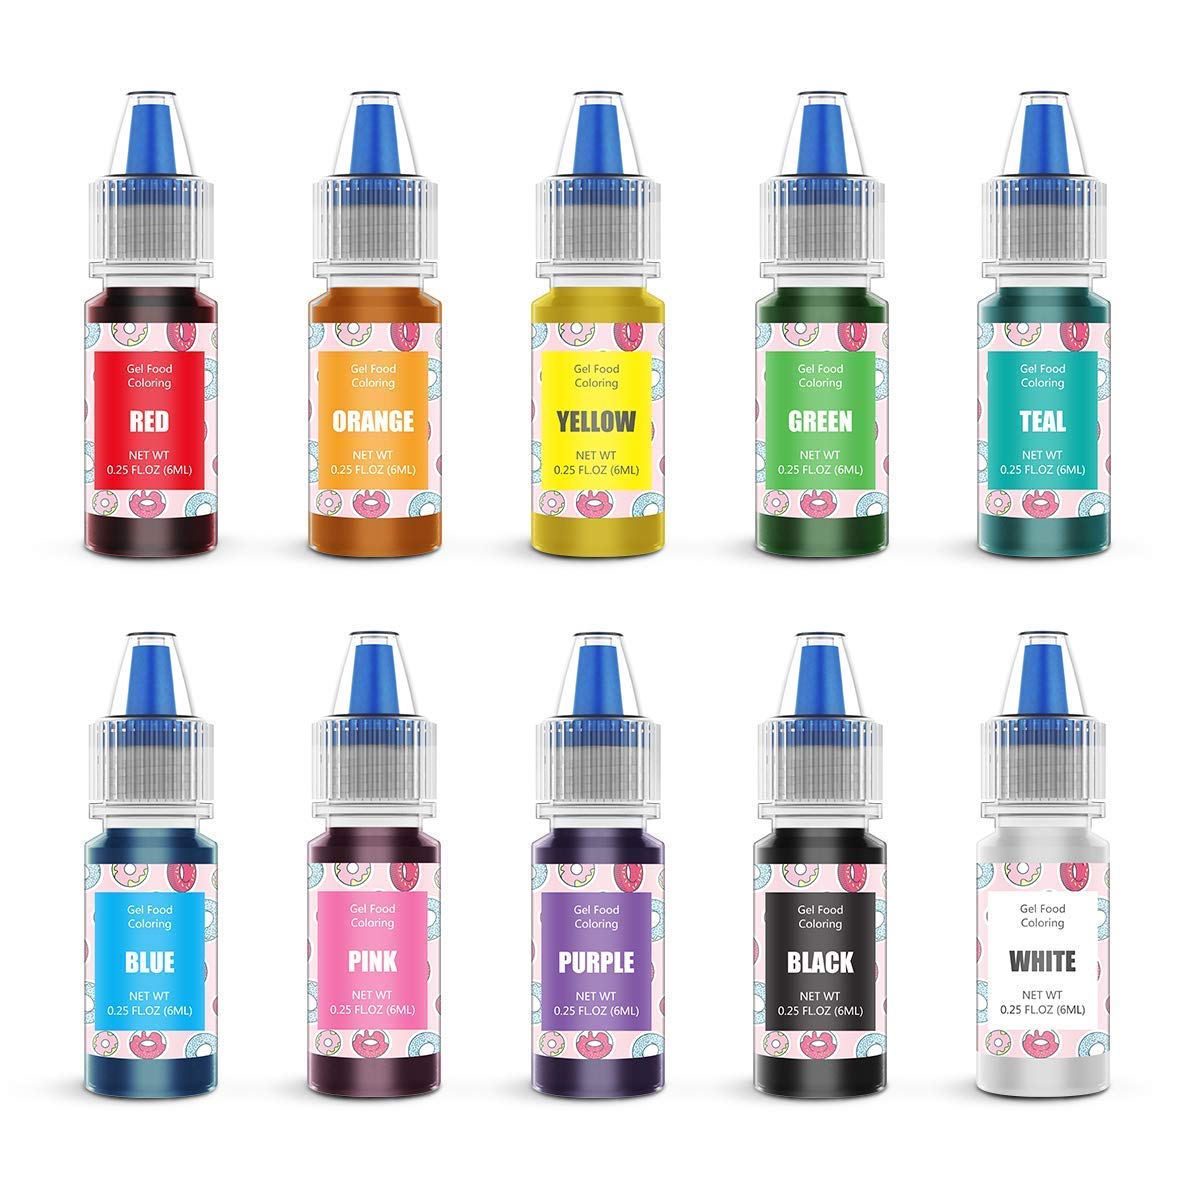 Food Coloring - 10 Color Cake Food Coloring Liquid Variety Kit for Baking, Decorating,Fondant and Cooking, Slime Making Supplies Kit - 25 fl oz (6ml)